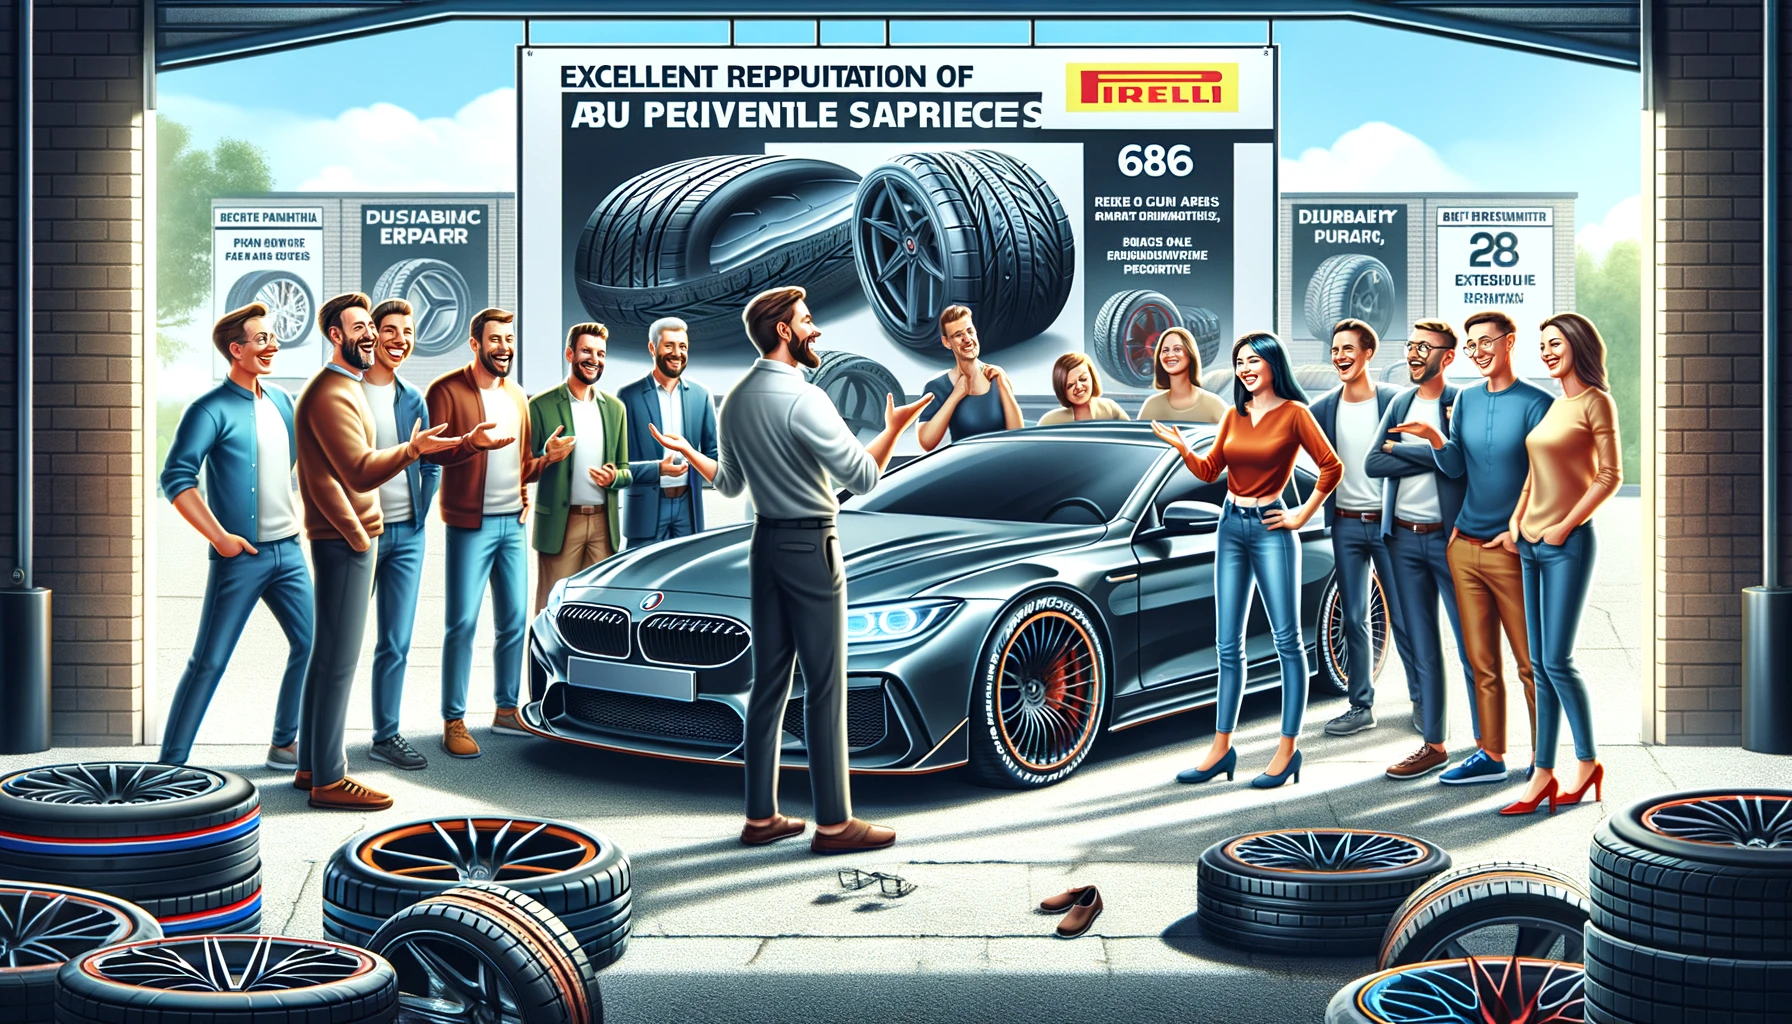 An image illustrating the excellent reputation of Pirelli tires among users. The scene shows a group of diverse car owners gathered around a sleek, high-performance car fitted with Pirelli tires in a community setting. Each person is smiling and pointing at the tires, discussing their positive experiences. The environment is friendly and casual, with a sense of community and satisfaction among the car enthusiasts. The background includes banners praising the durability and performance of Pirelli tires. The image is in a 16:9 aspect ratio.